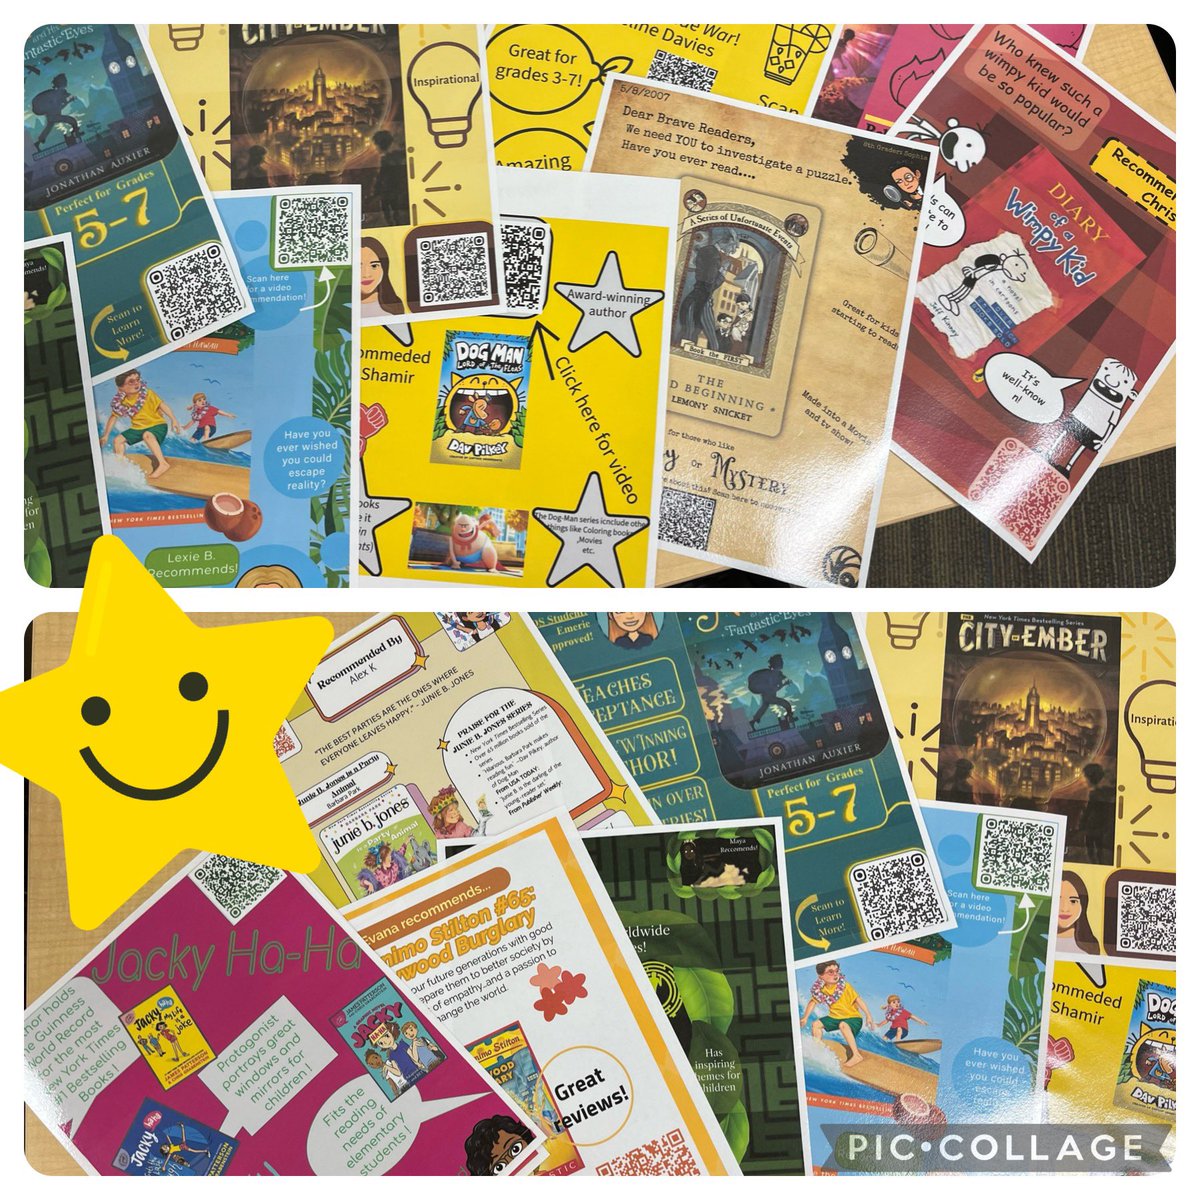 Look at these ⭐️s! These posters from @MsKilczewski turned out great! Love the culmination of the project, collaboration, and research that went into these from so many stakeholders. Looking forward to the installation for summer reading in Bayside Public Library! @vblms #vblms